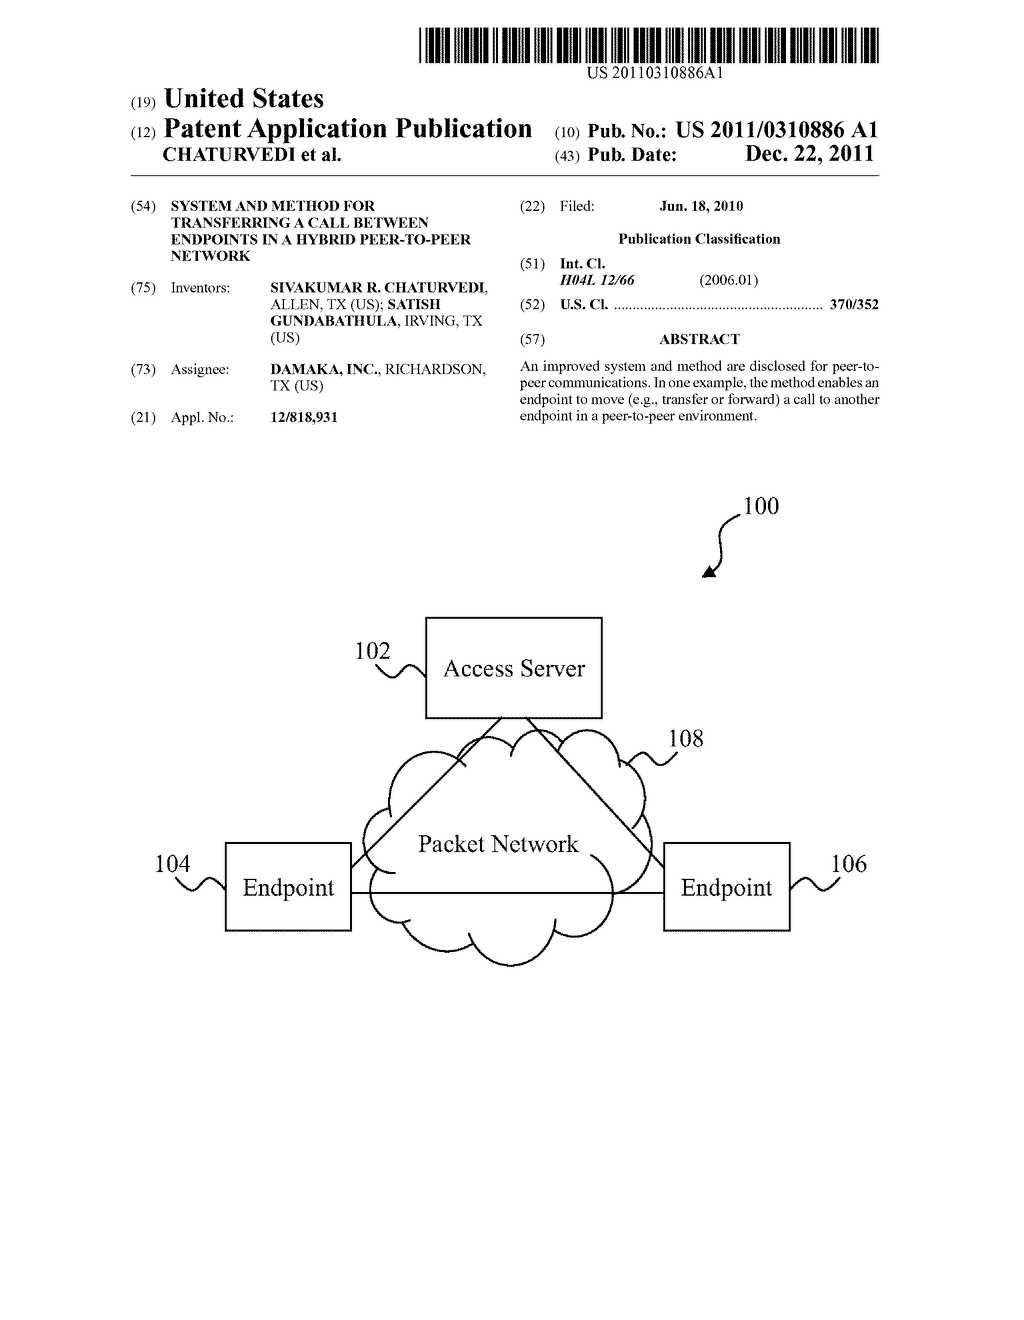 SYSTEM AND METHOD FOR TRANSFERRING A CALL BETWEEN ENDPOINTS IN A HYBRID     PEER-TO-PEER NETWORK - diagram, schematic, and image 01